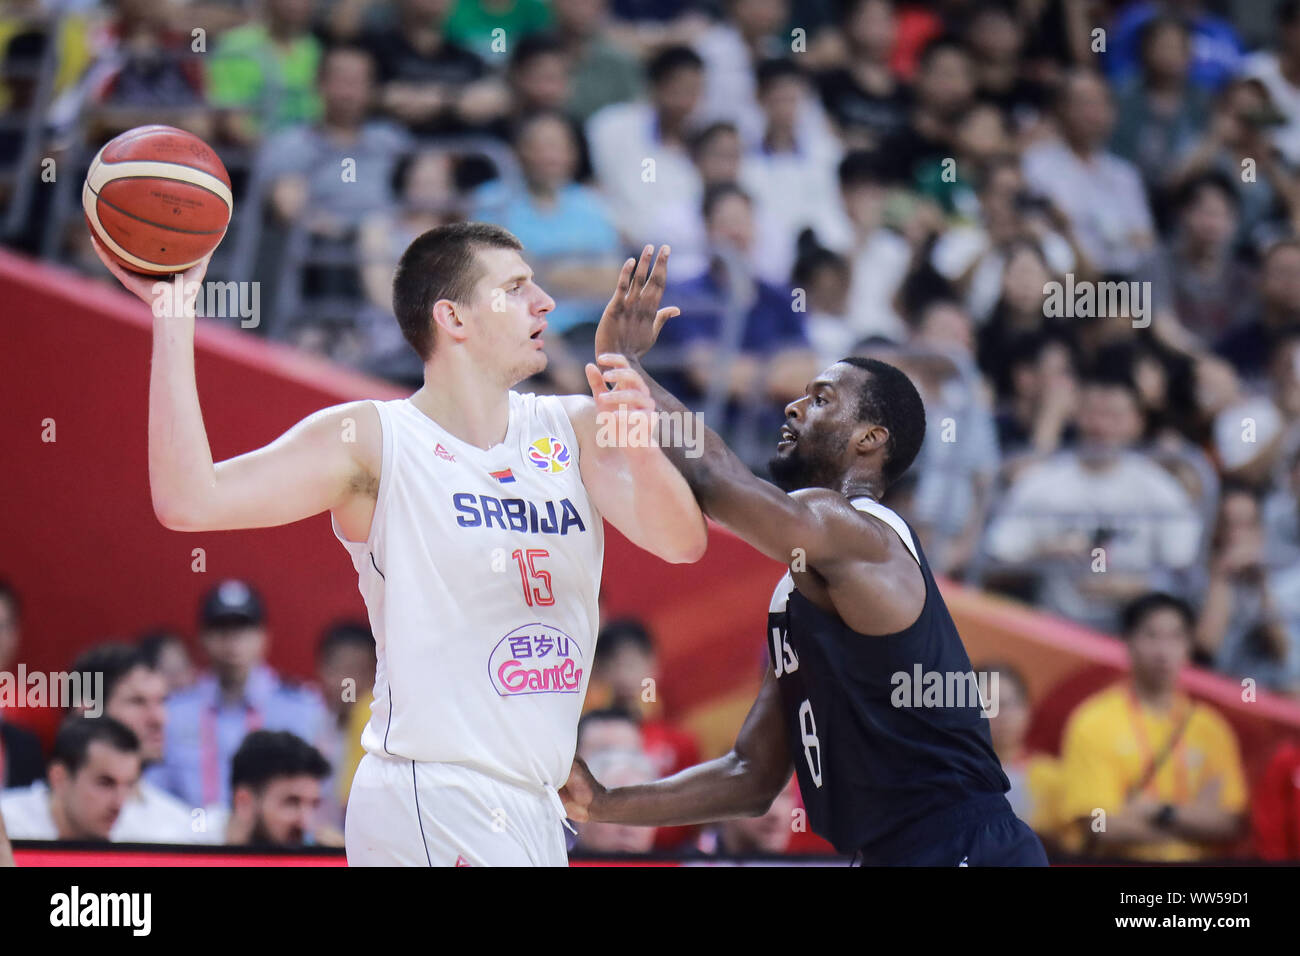 Nikola Jokic of Serbia, left, keeps the ball during the 5th – 8th classification round against the United States of FIBA Basketball World Cup in Dongguan, south China's Guangdong province, 12 September 2019. The United States is beaten by Serbia with 94-89 at 5th – 8th classification round of FIBA World Cup in Dongguan, south China's Guangdong province, 12 September 2019. Stock Photo